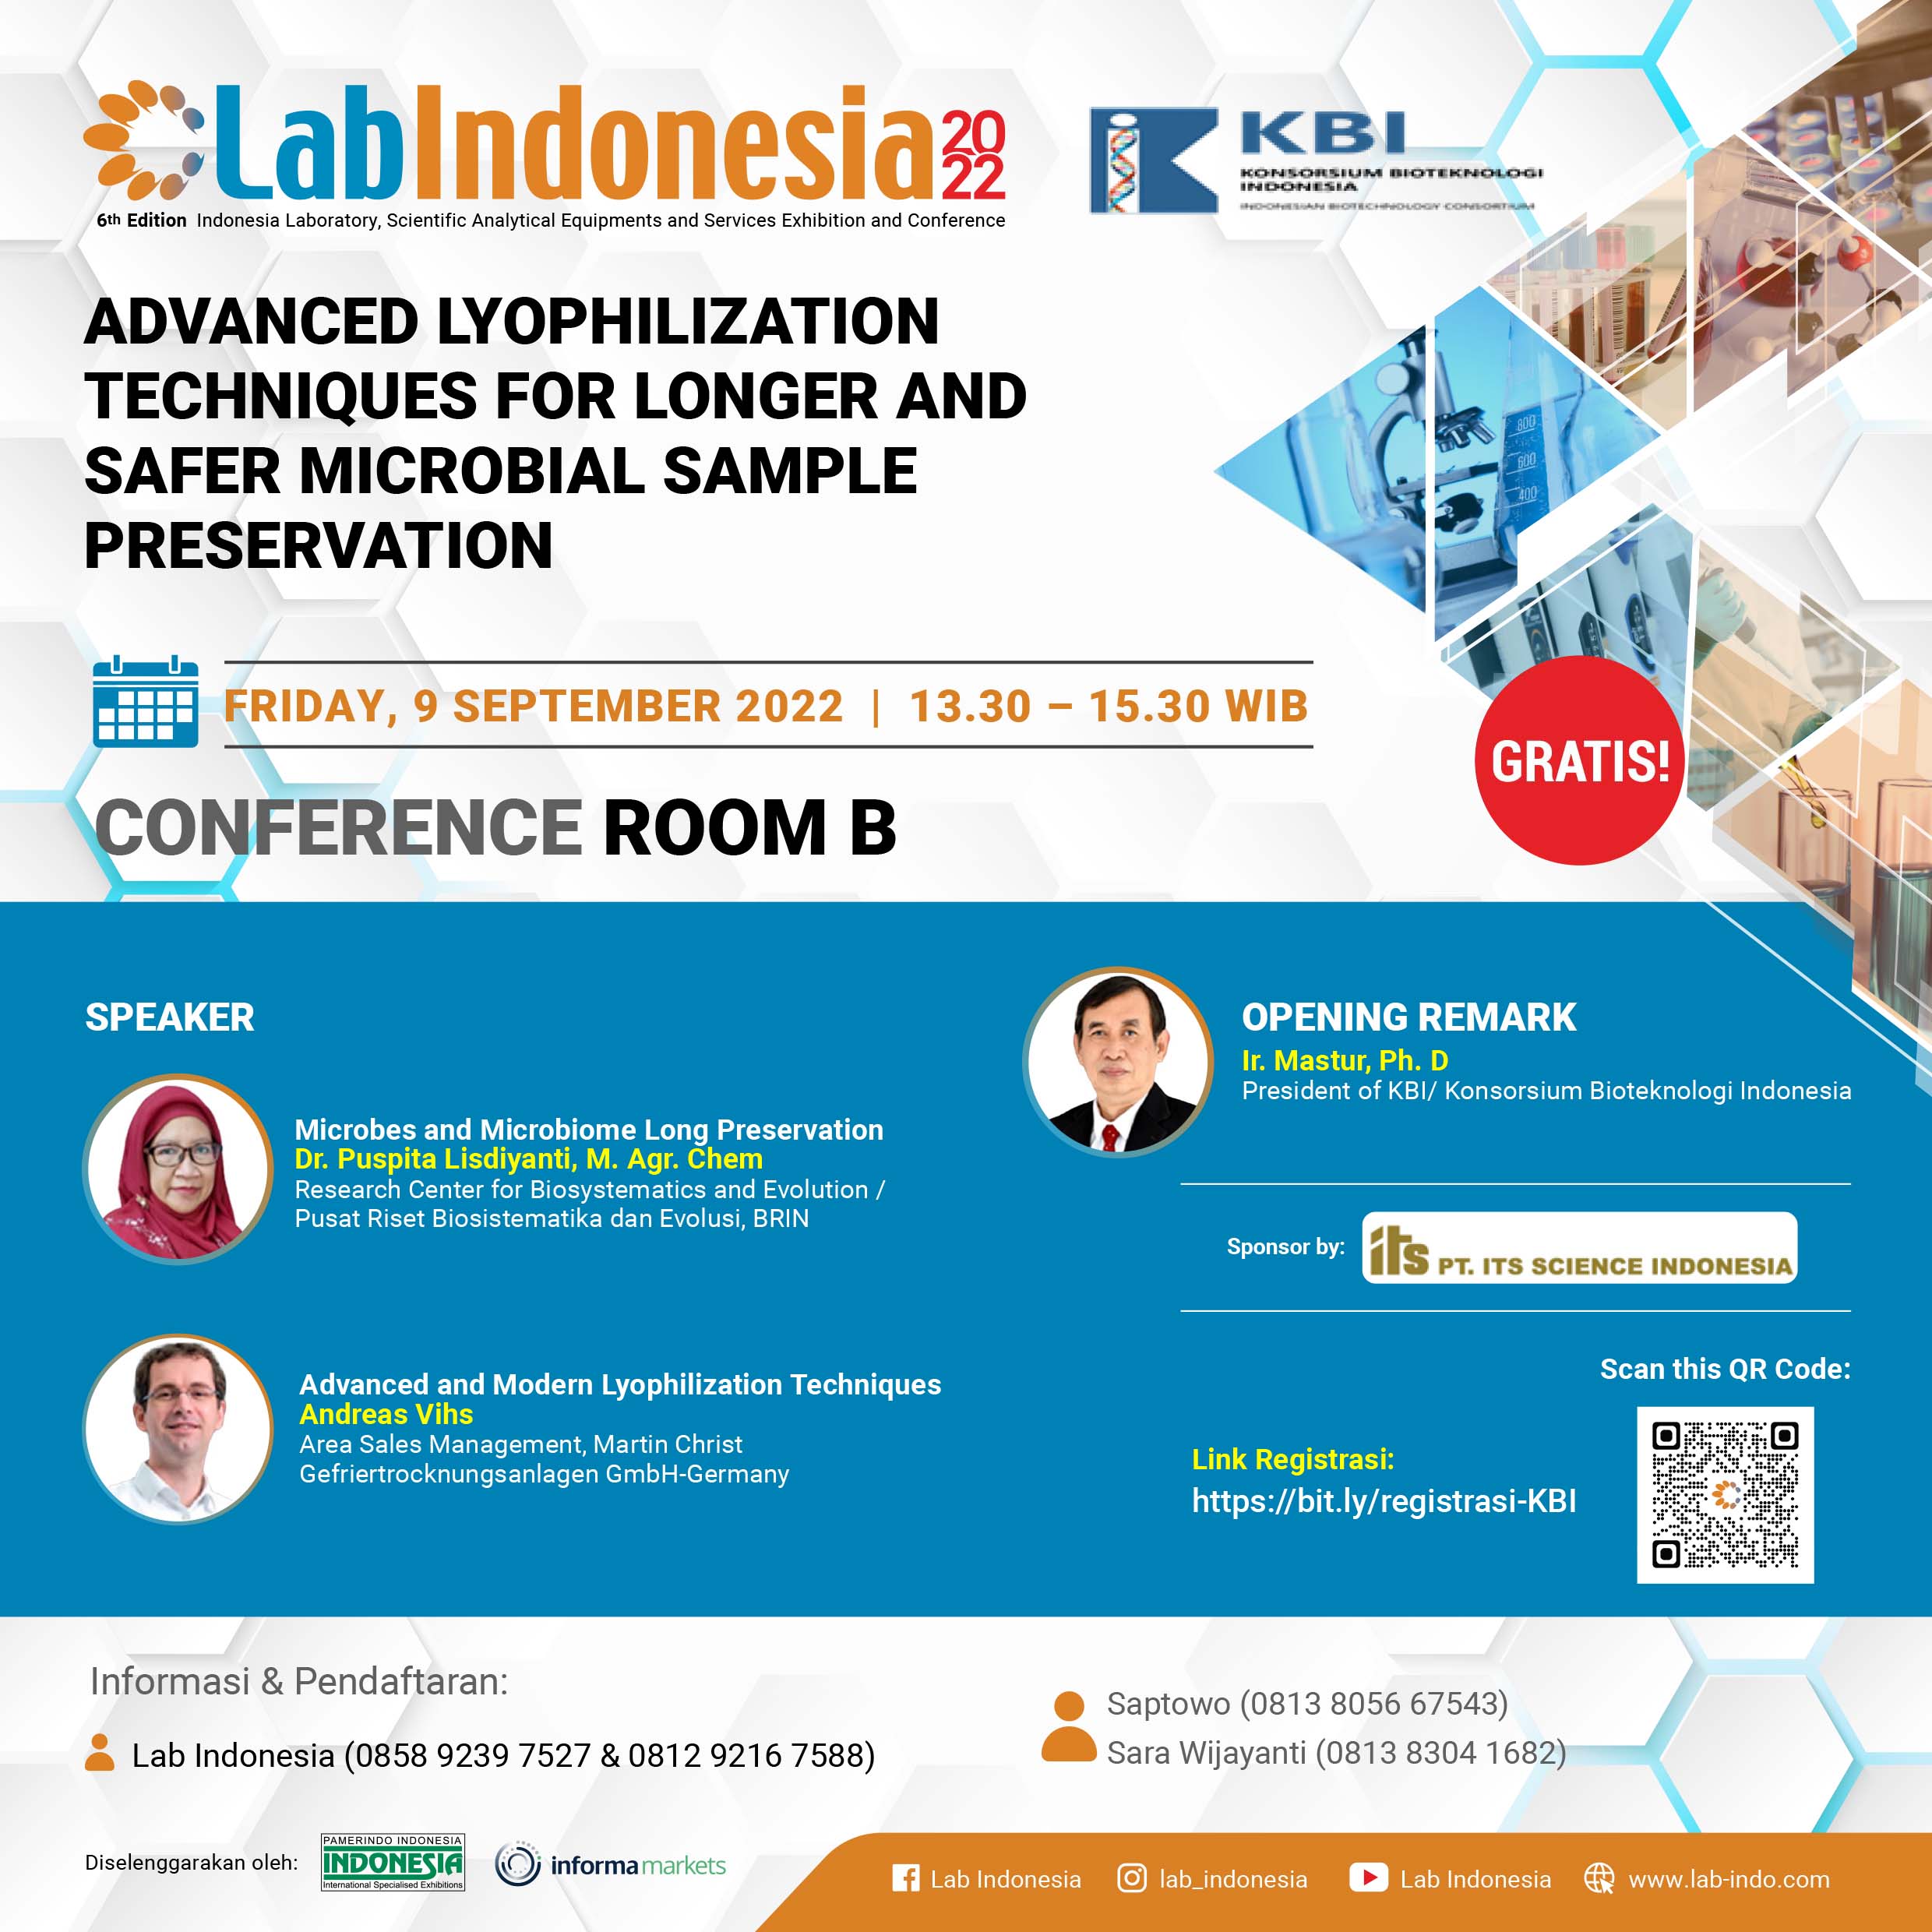 “Advanced Lyophilization Techniques for Longer and Safer Microbial Sample Preservation.” seminar at LabIndonesia 2022